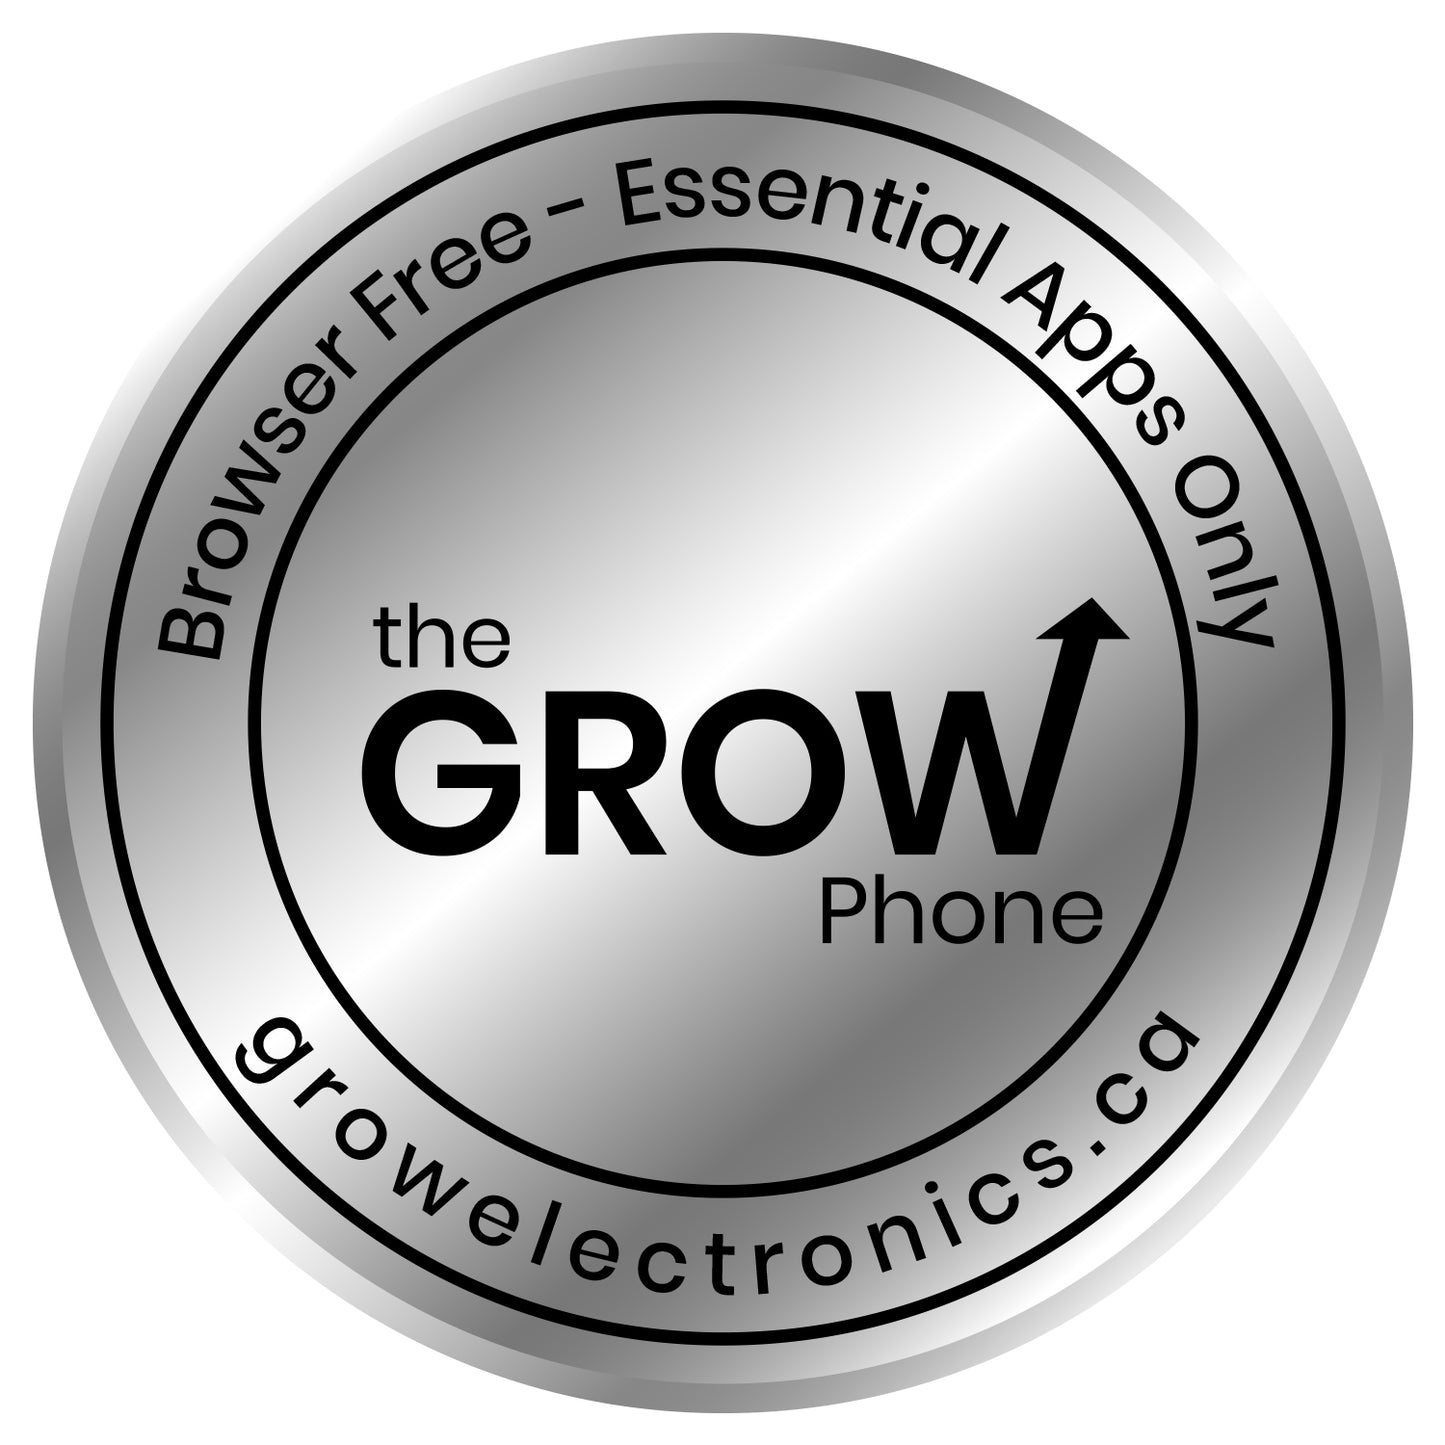 Samsung A04e - the GROW phone l - Browser Free Essential Apps Only Phone